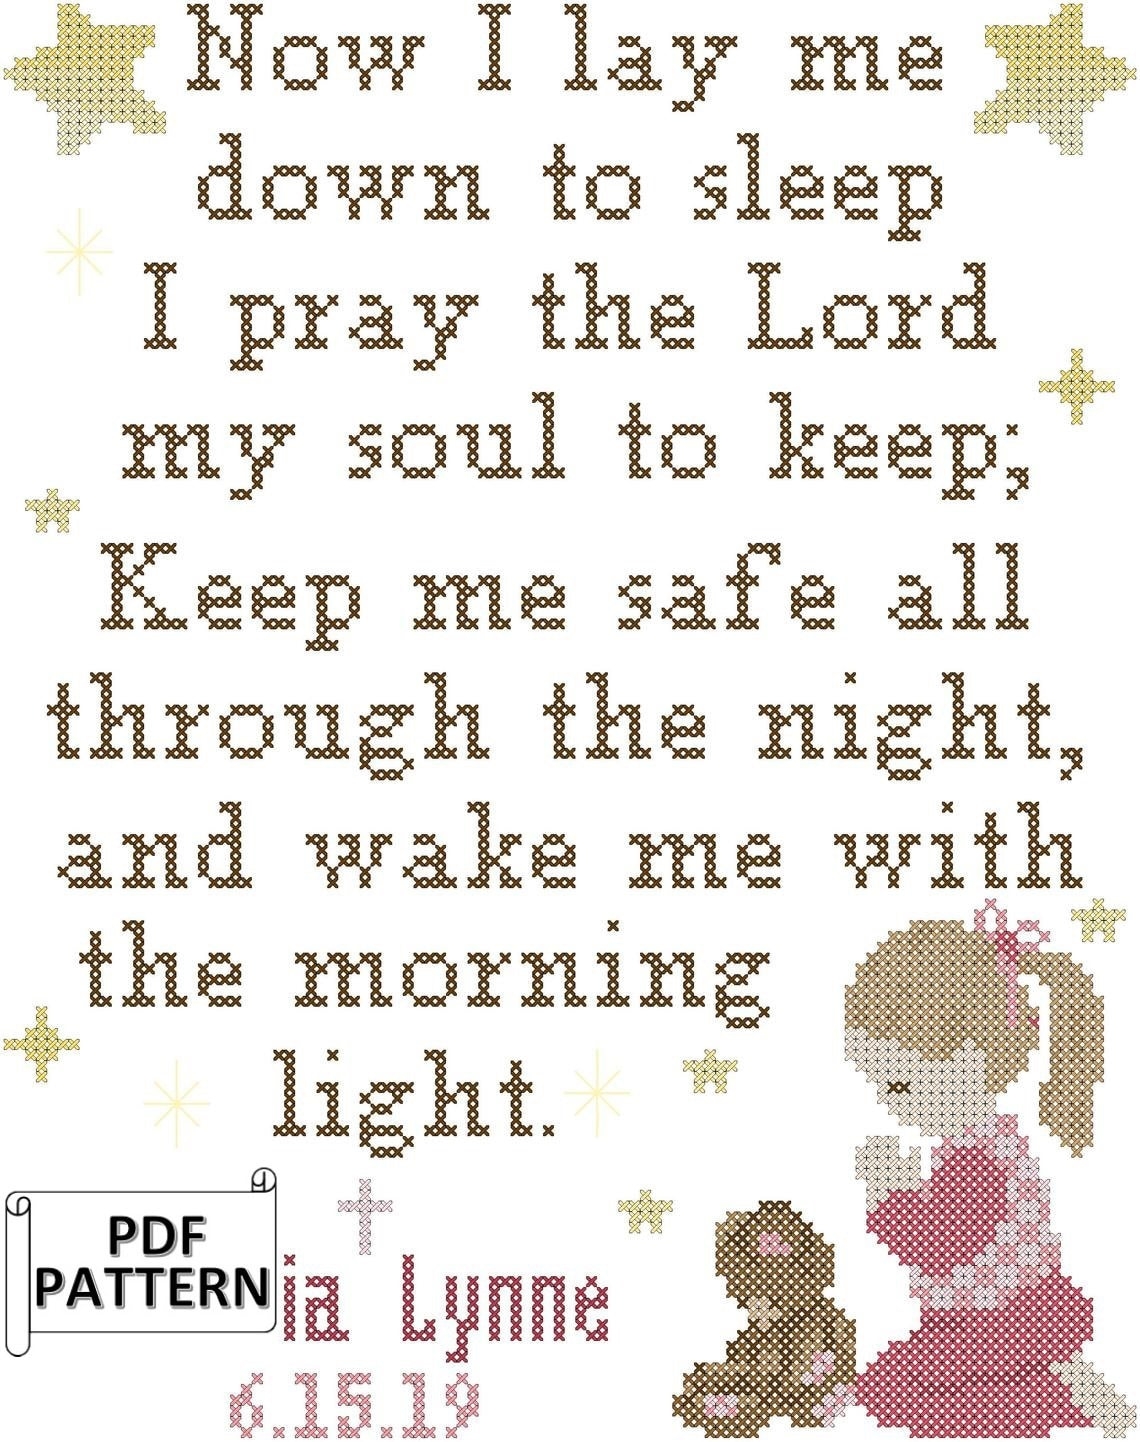 Now I Lay Me Down To Sleep Girl s Bedtime Prayer Counted Cross Stitch PDF Pattern With Alphabet And Numbers For DIY Personalization Etsy